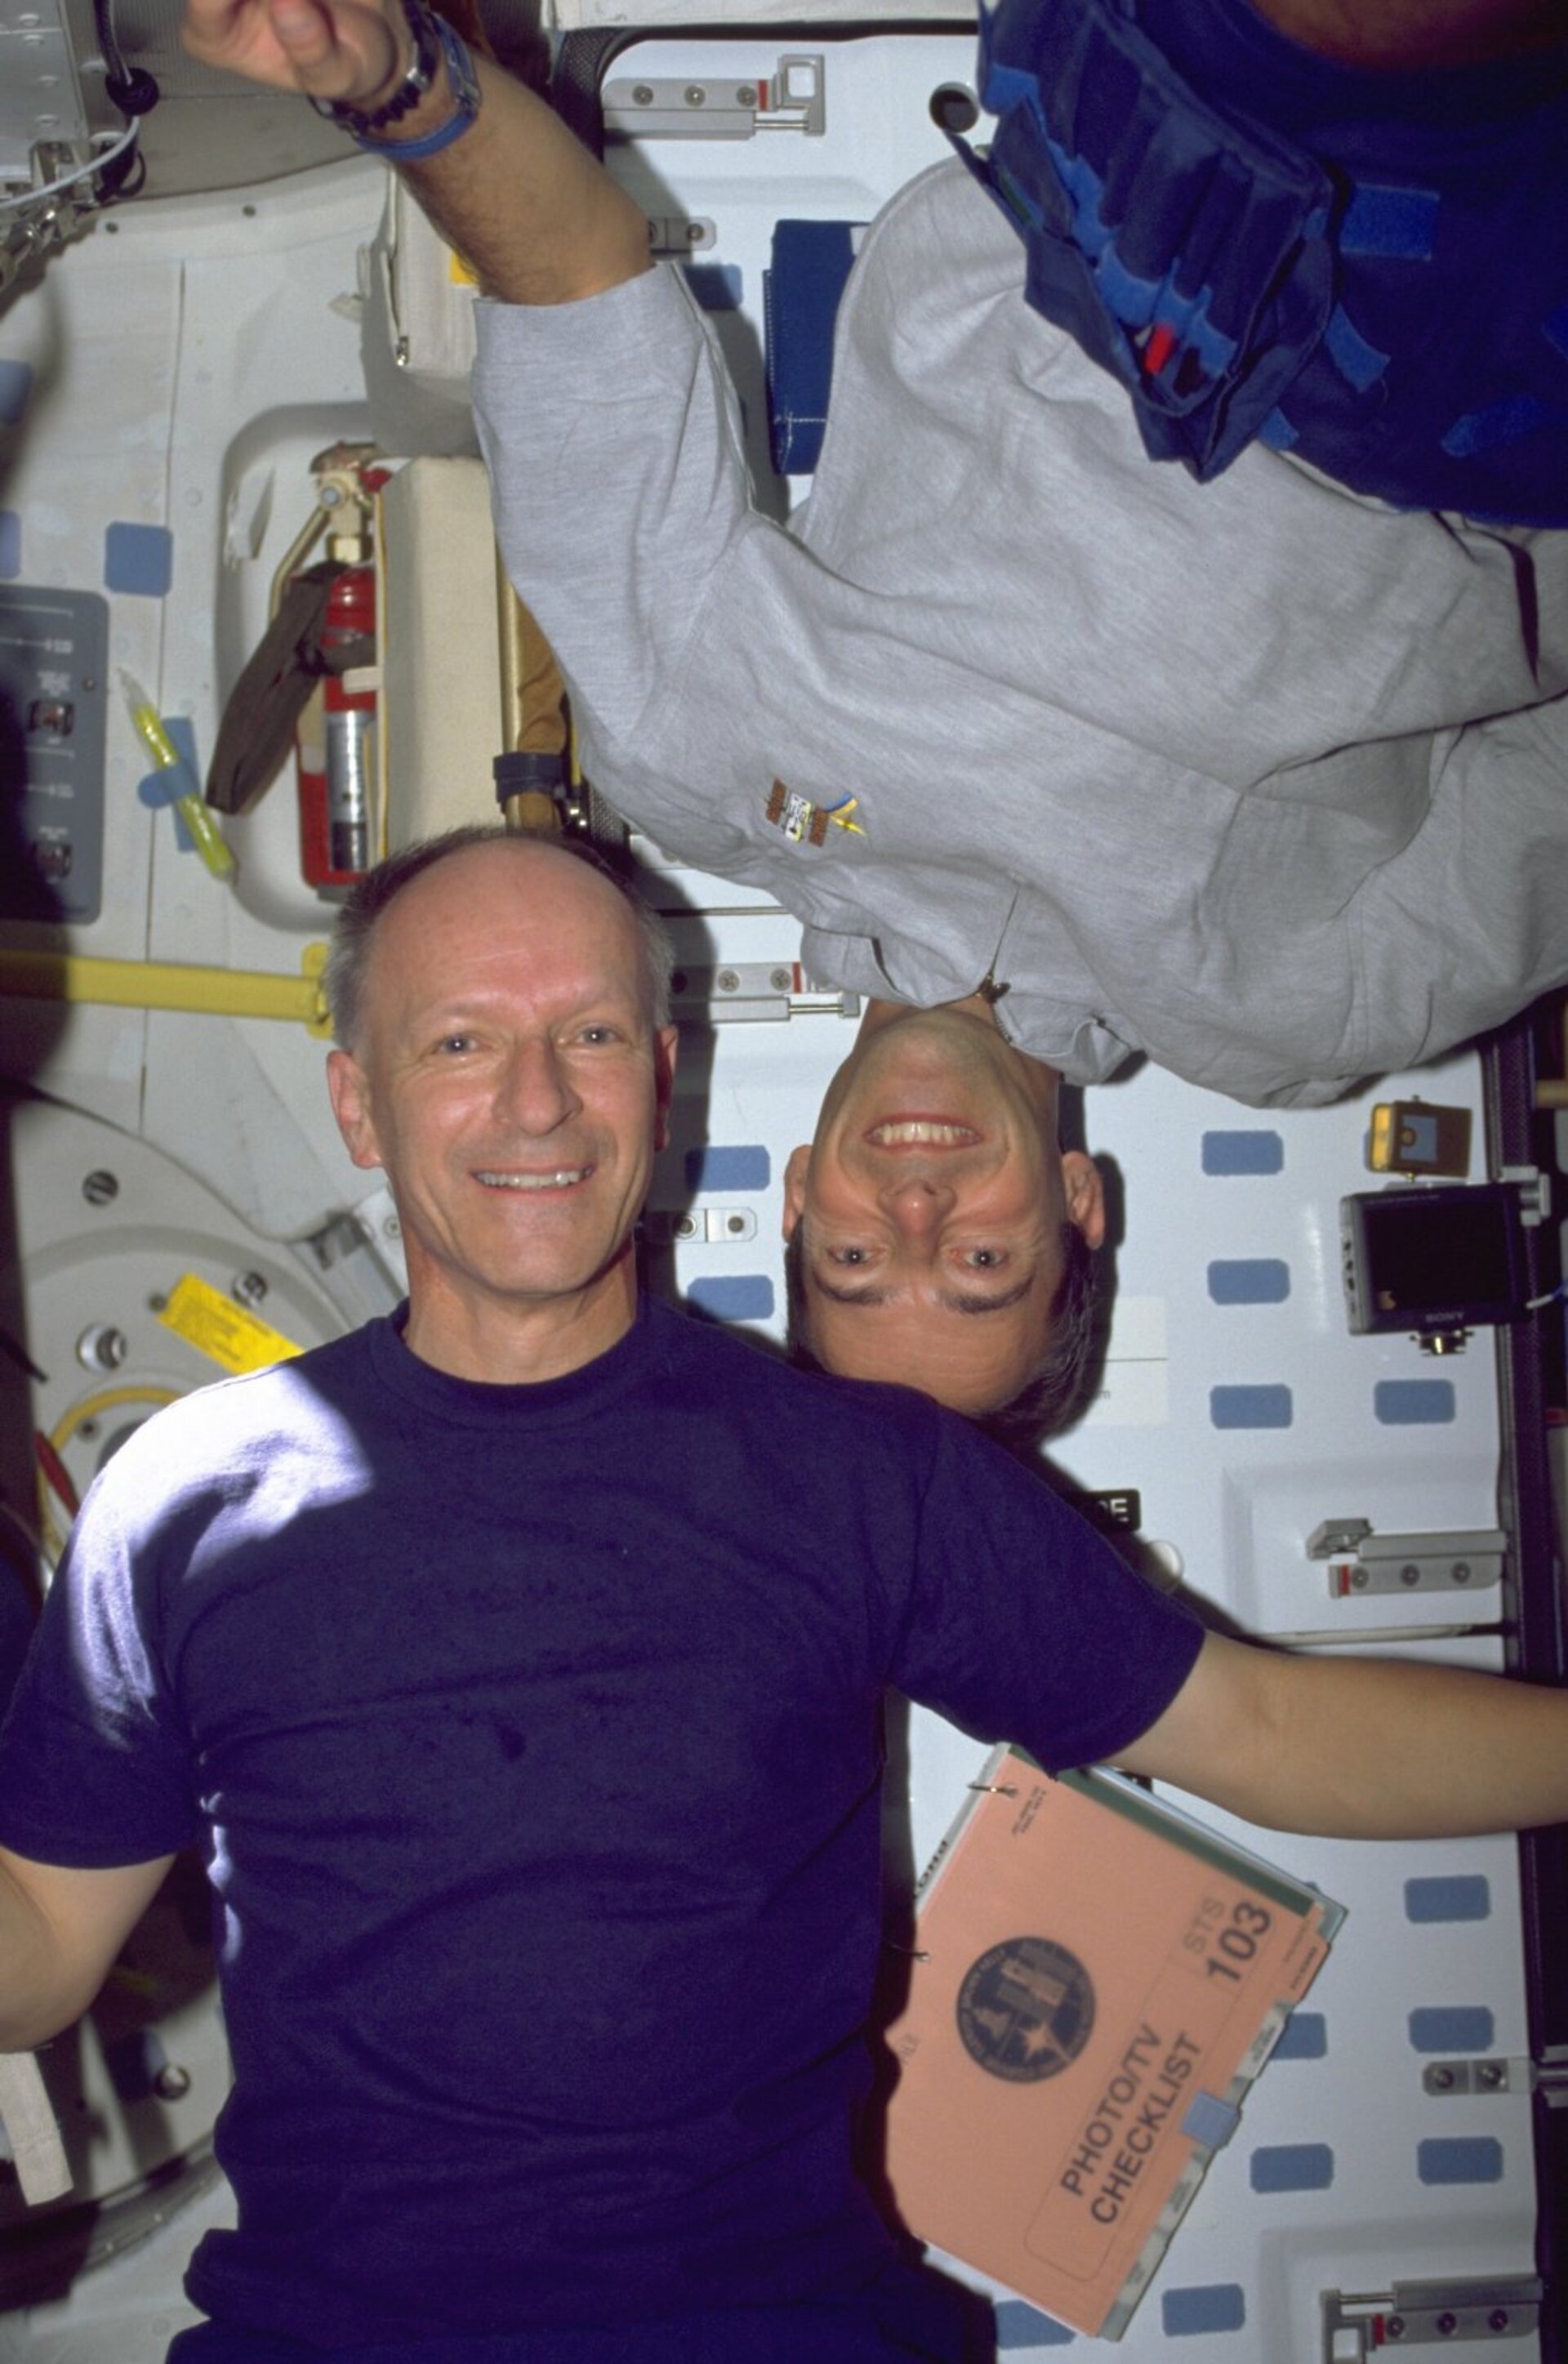 Claude Nicollier (left) and Jean-François Clervoy during the STS-103 mission